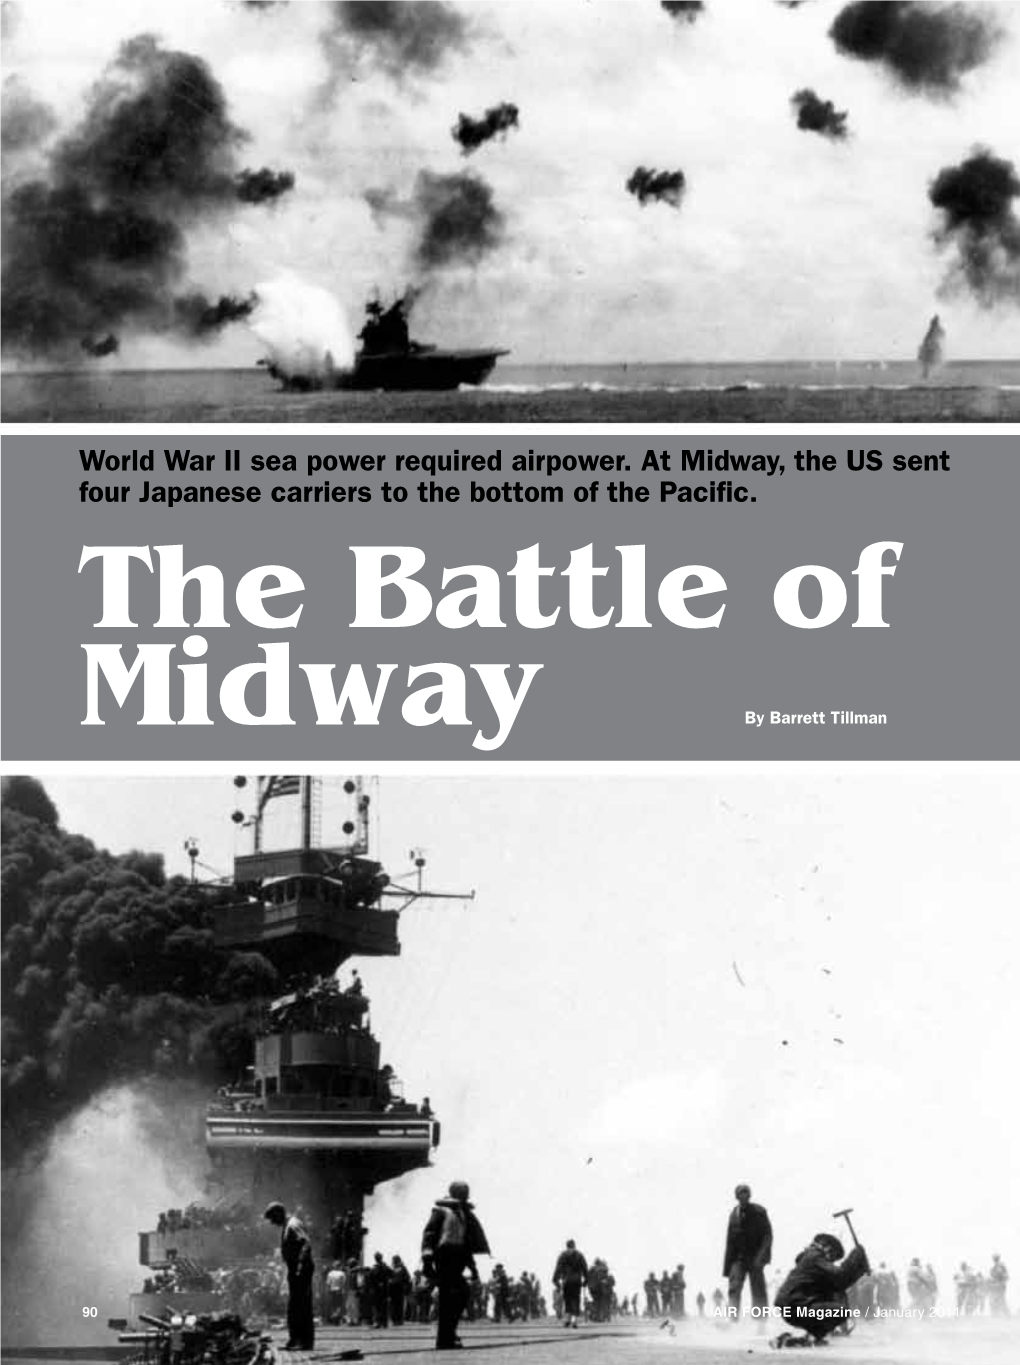 World War II Sea Power Required Airpower. at Midway, the US Sent Four Japanese Carriers to the Bottom of the Pacific. the Battle Of